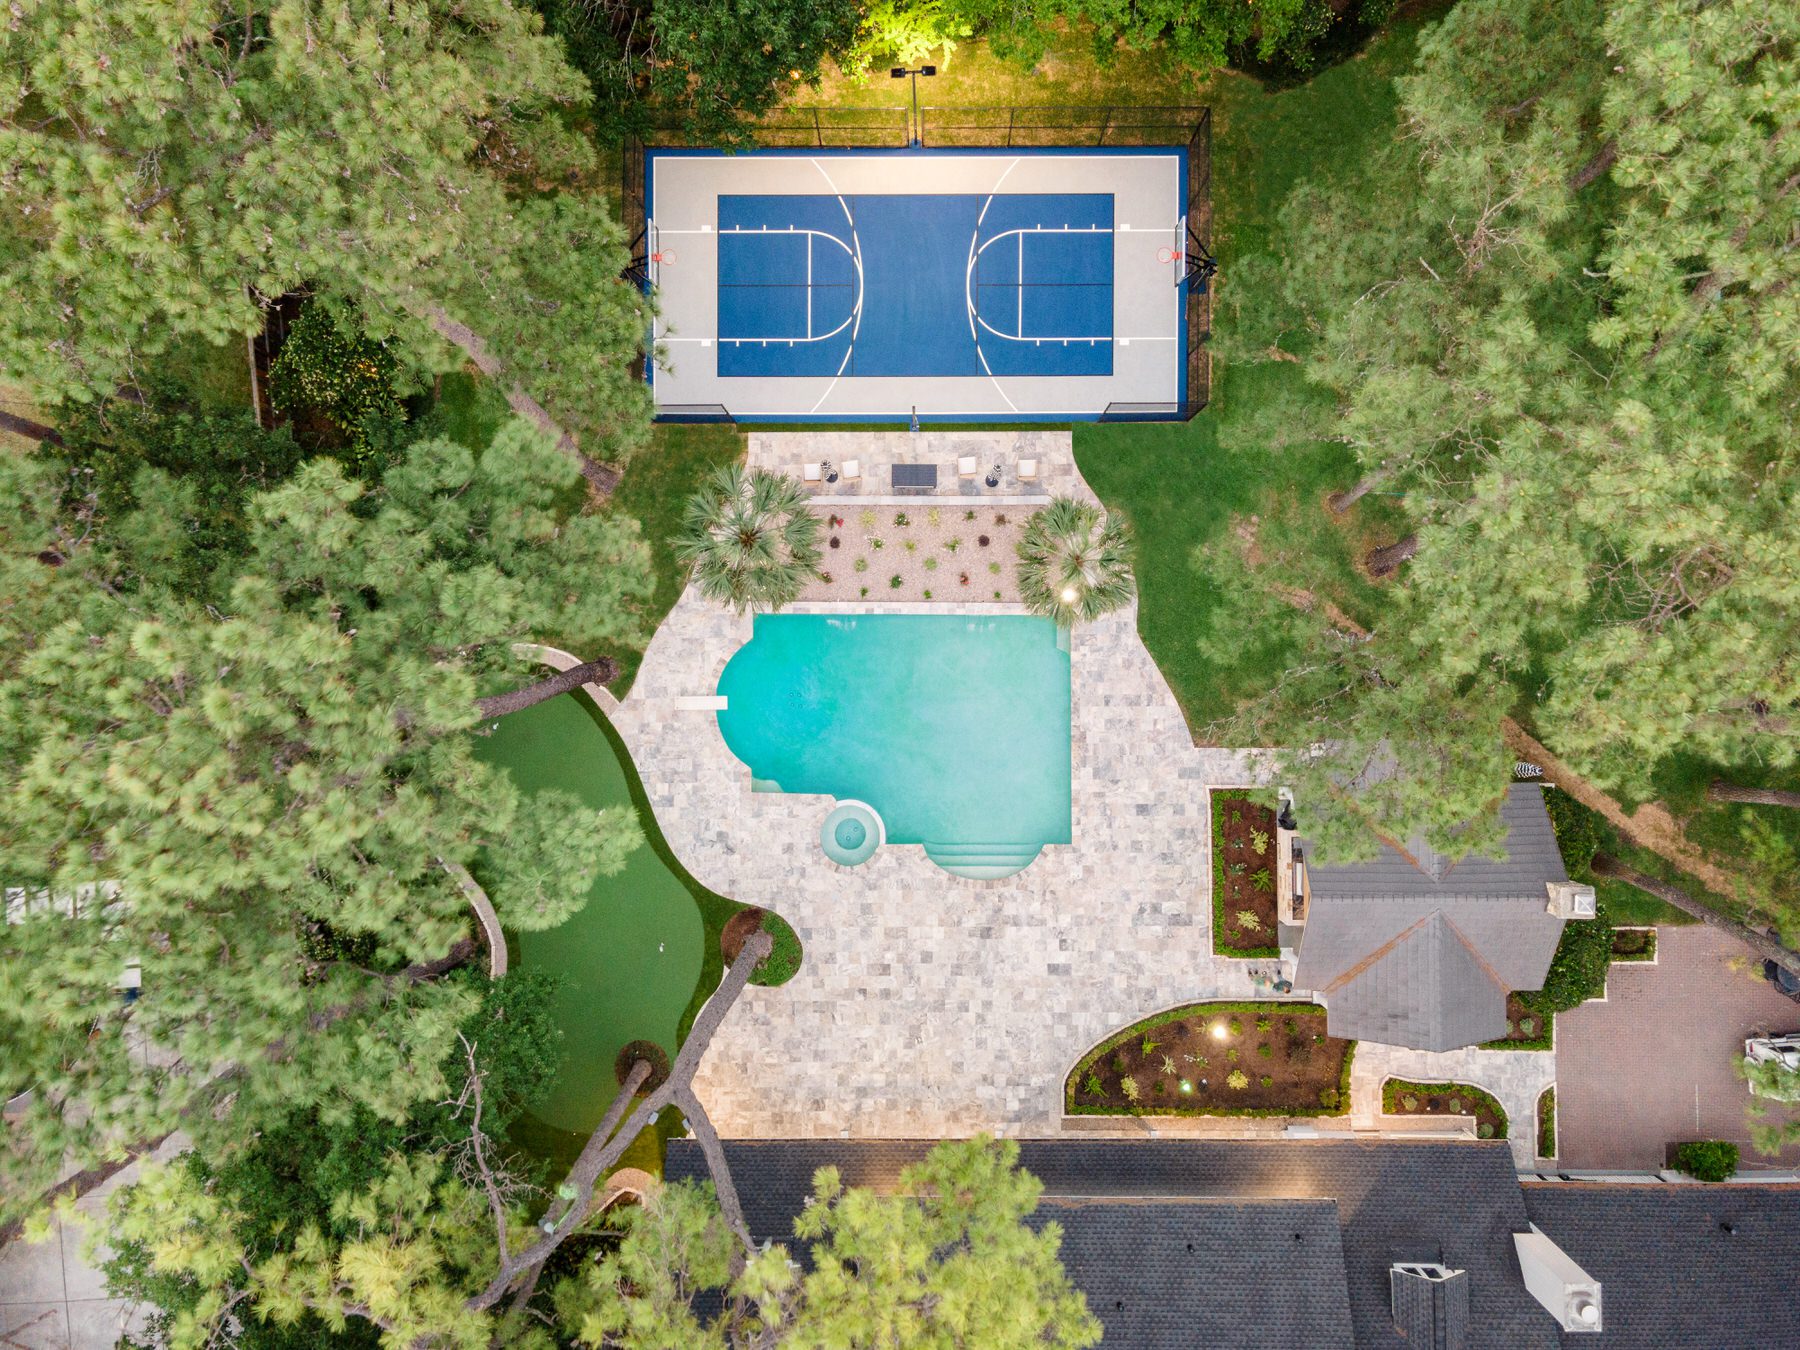 overhead view of artificial basketball court